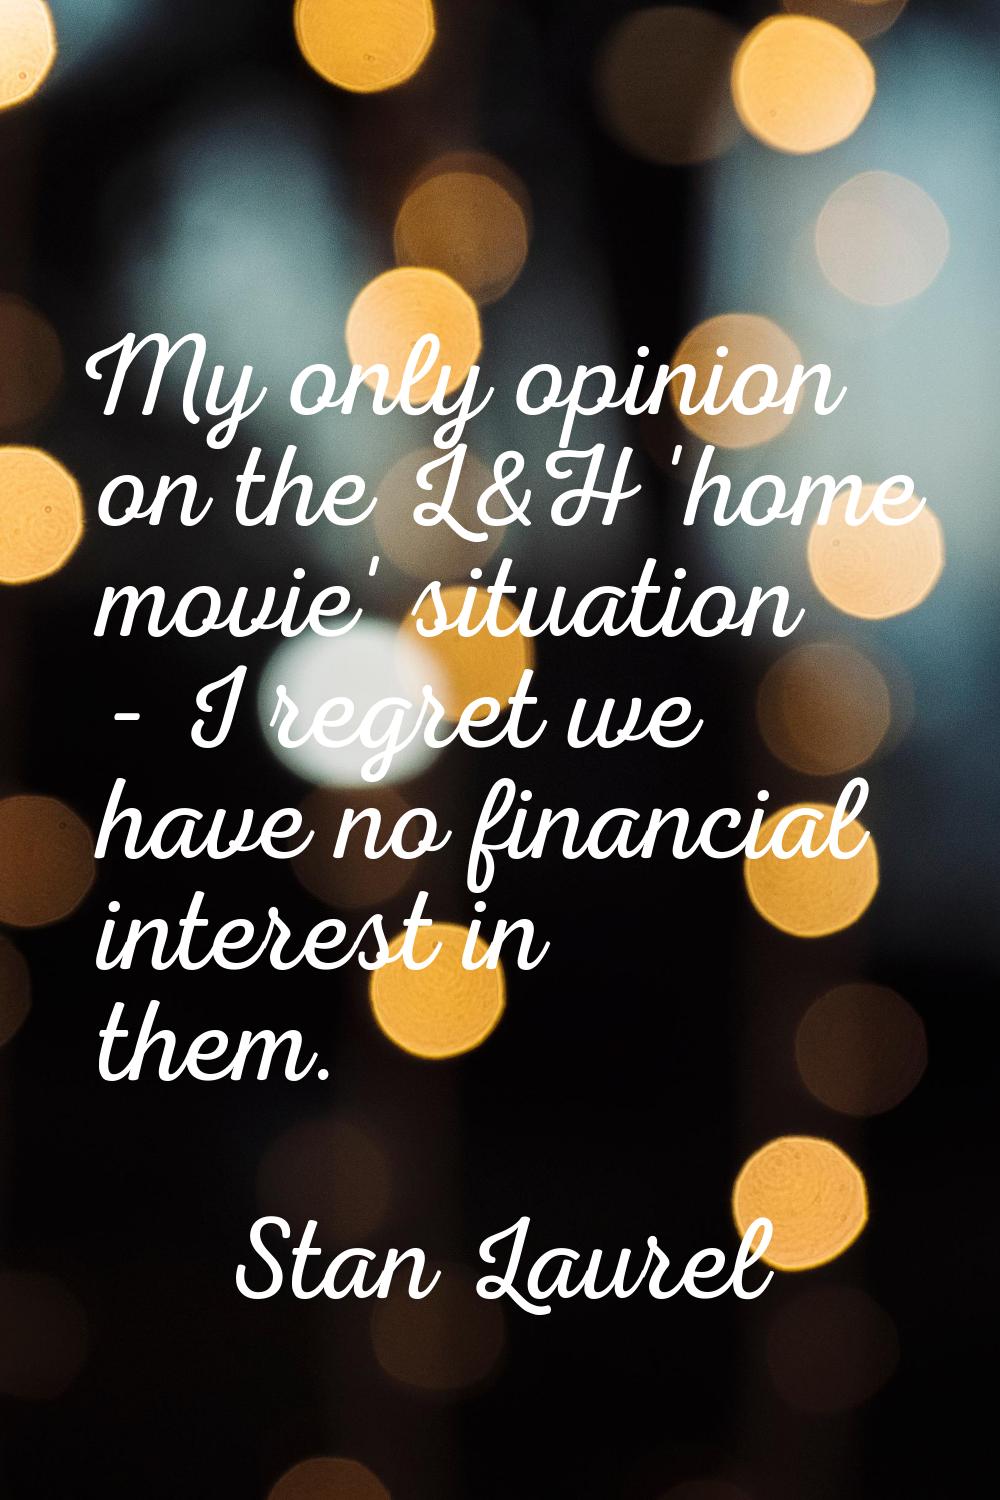 My only opinion on the L&H 'home movie' situation - I regret we have no financial interest in them.